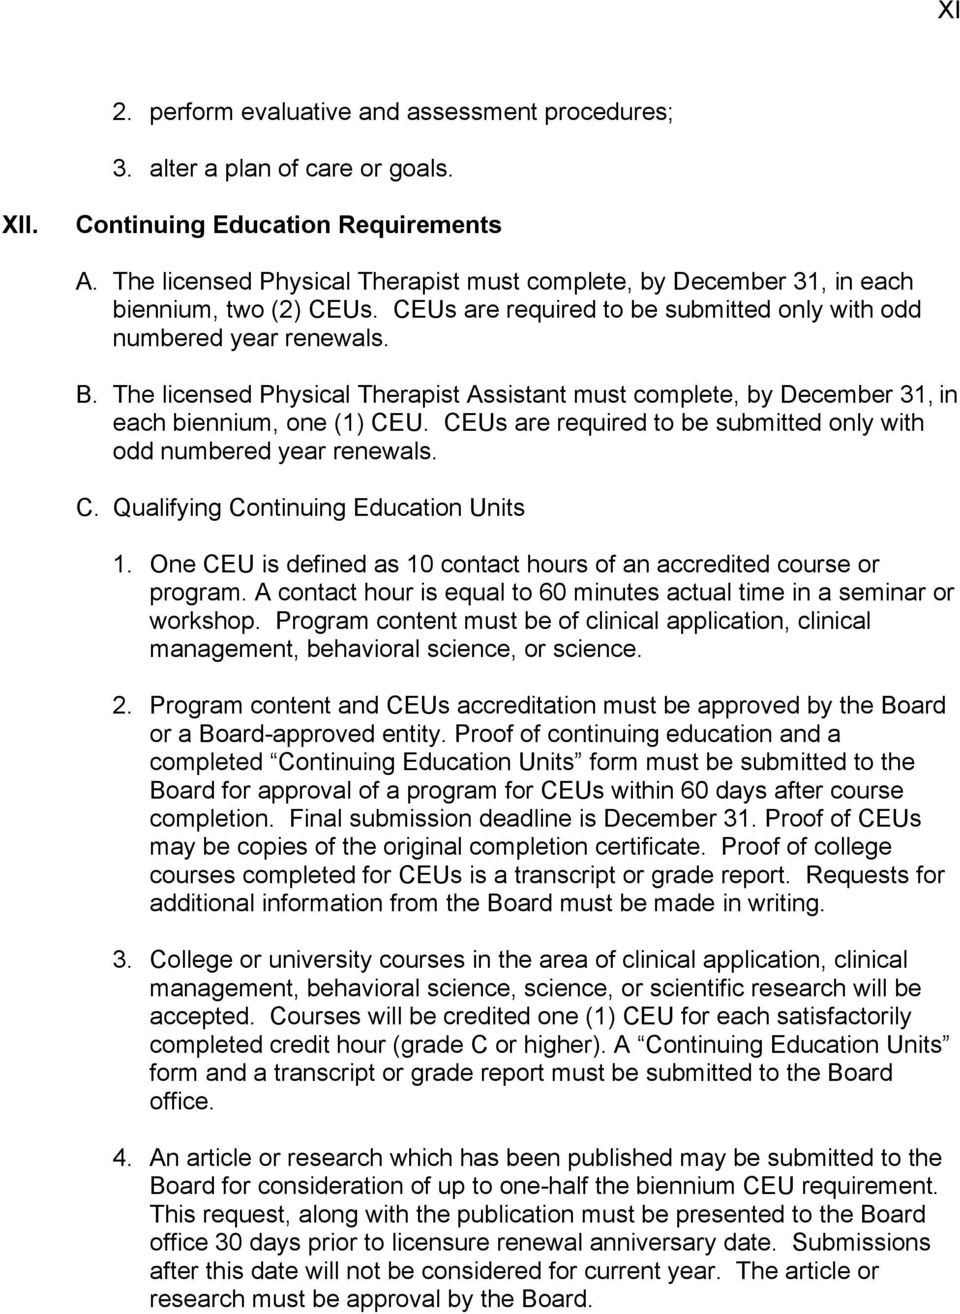 The licensed Physical Therapist Assistant must complete, by December 31, in each biennium, one (1) CEU. CEUs are required to be submitted only with odd numbered year renewals. C. Qualifying Continuing Education Units 1.